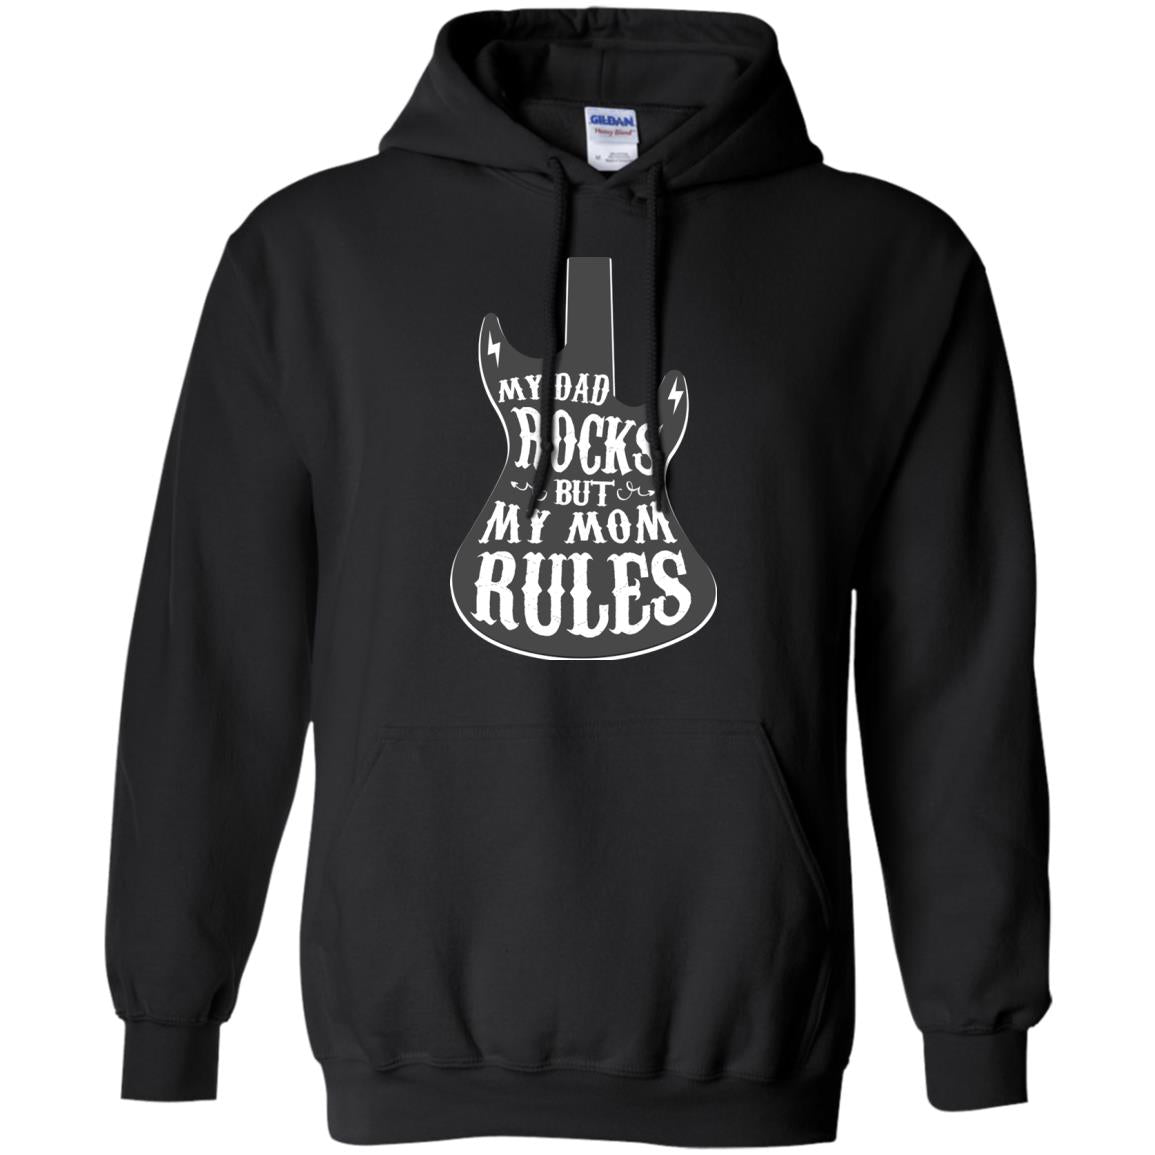 My Dad Rocks But My Mom Rules Shirt For Daughter Or SonG185 Gildan Pullover Hoodie 8 oz.